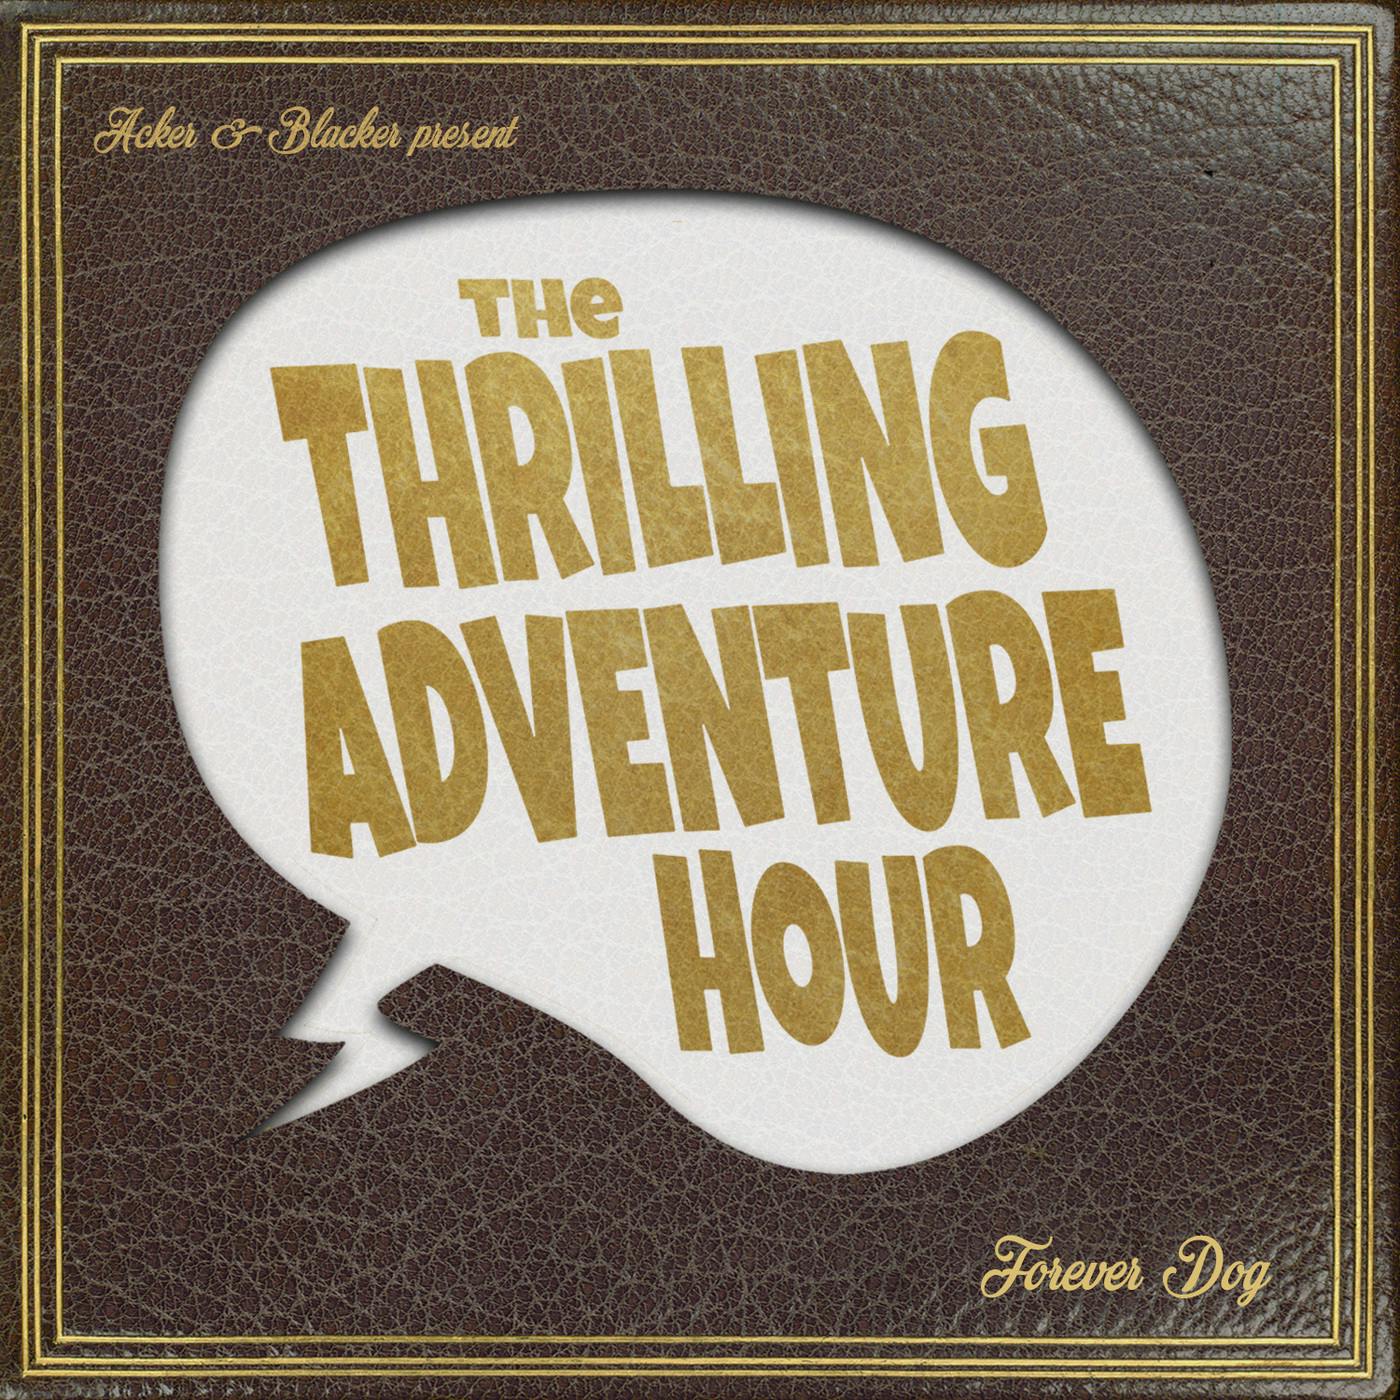 "The Thrilling Adventure Hour" Podcast